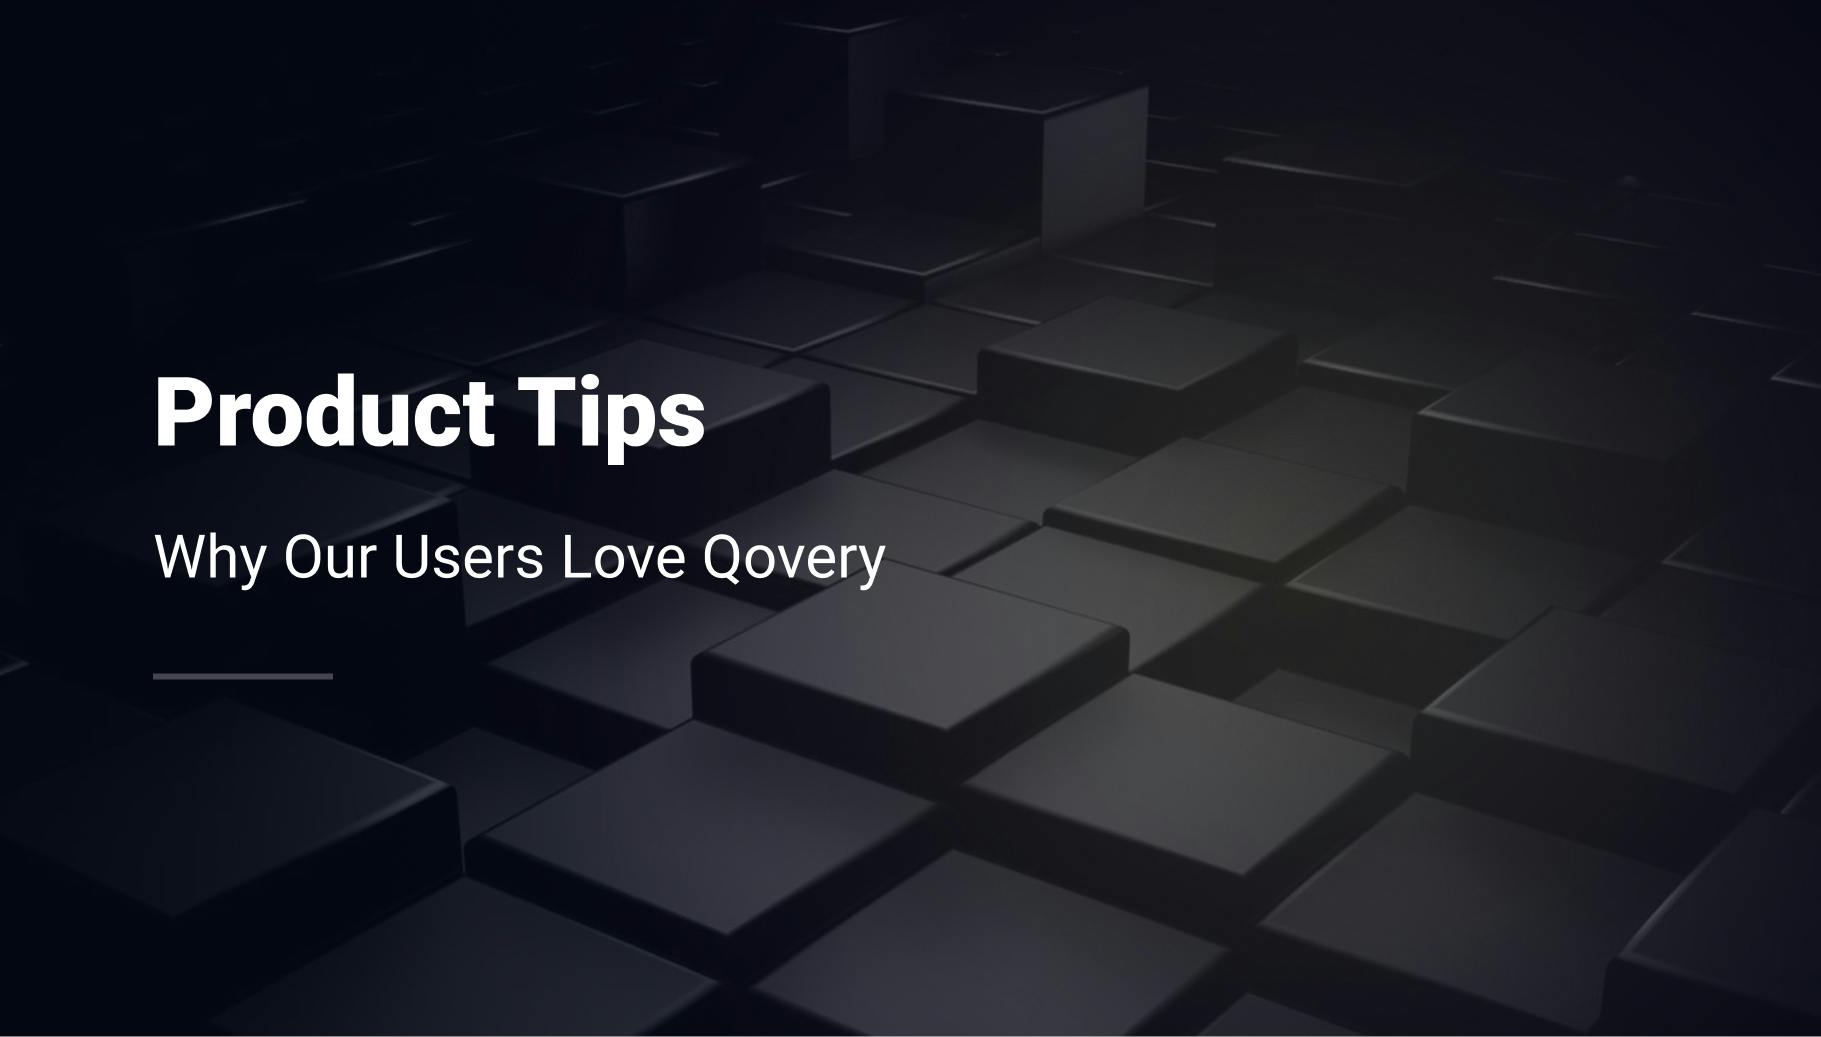 Why Our Users Love Our Product - Qovery